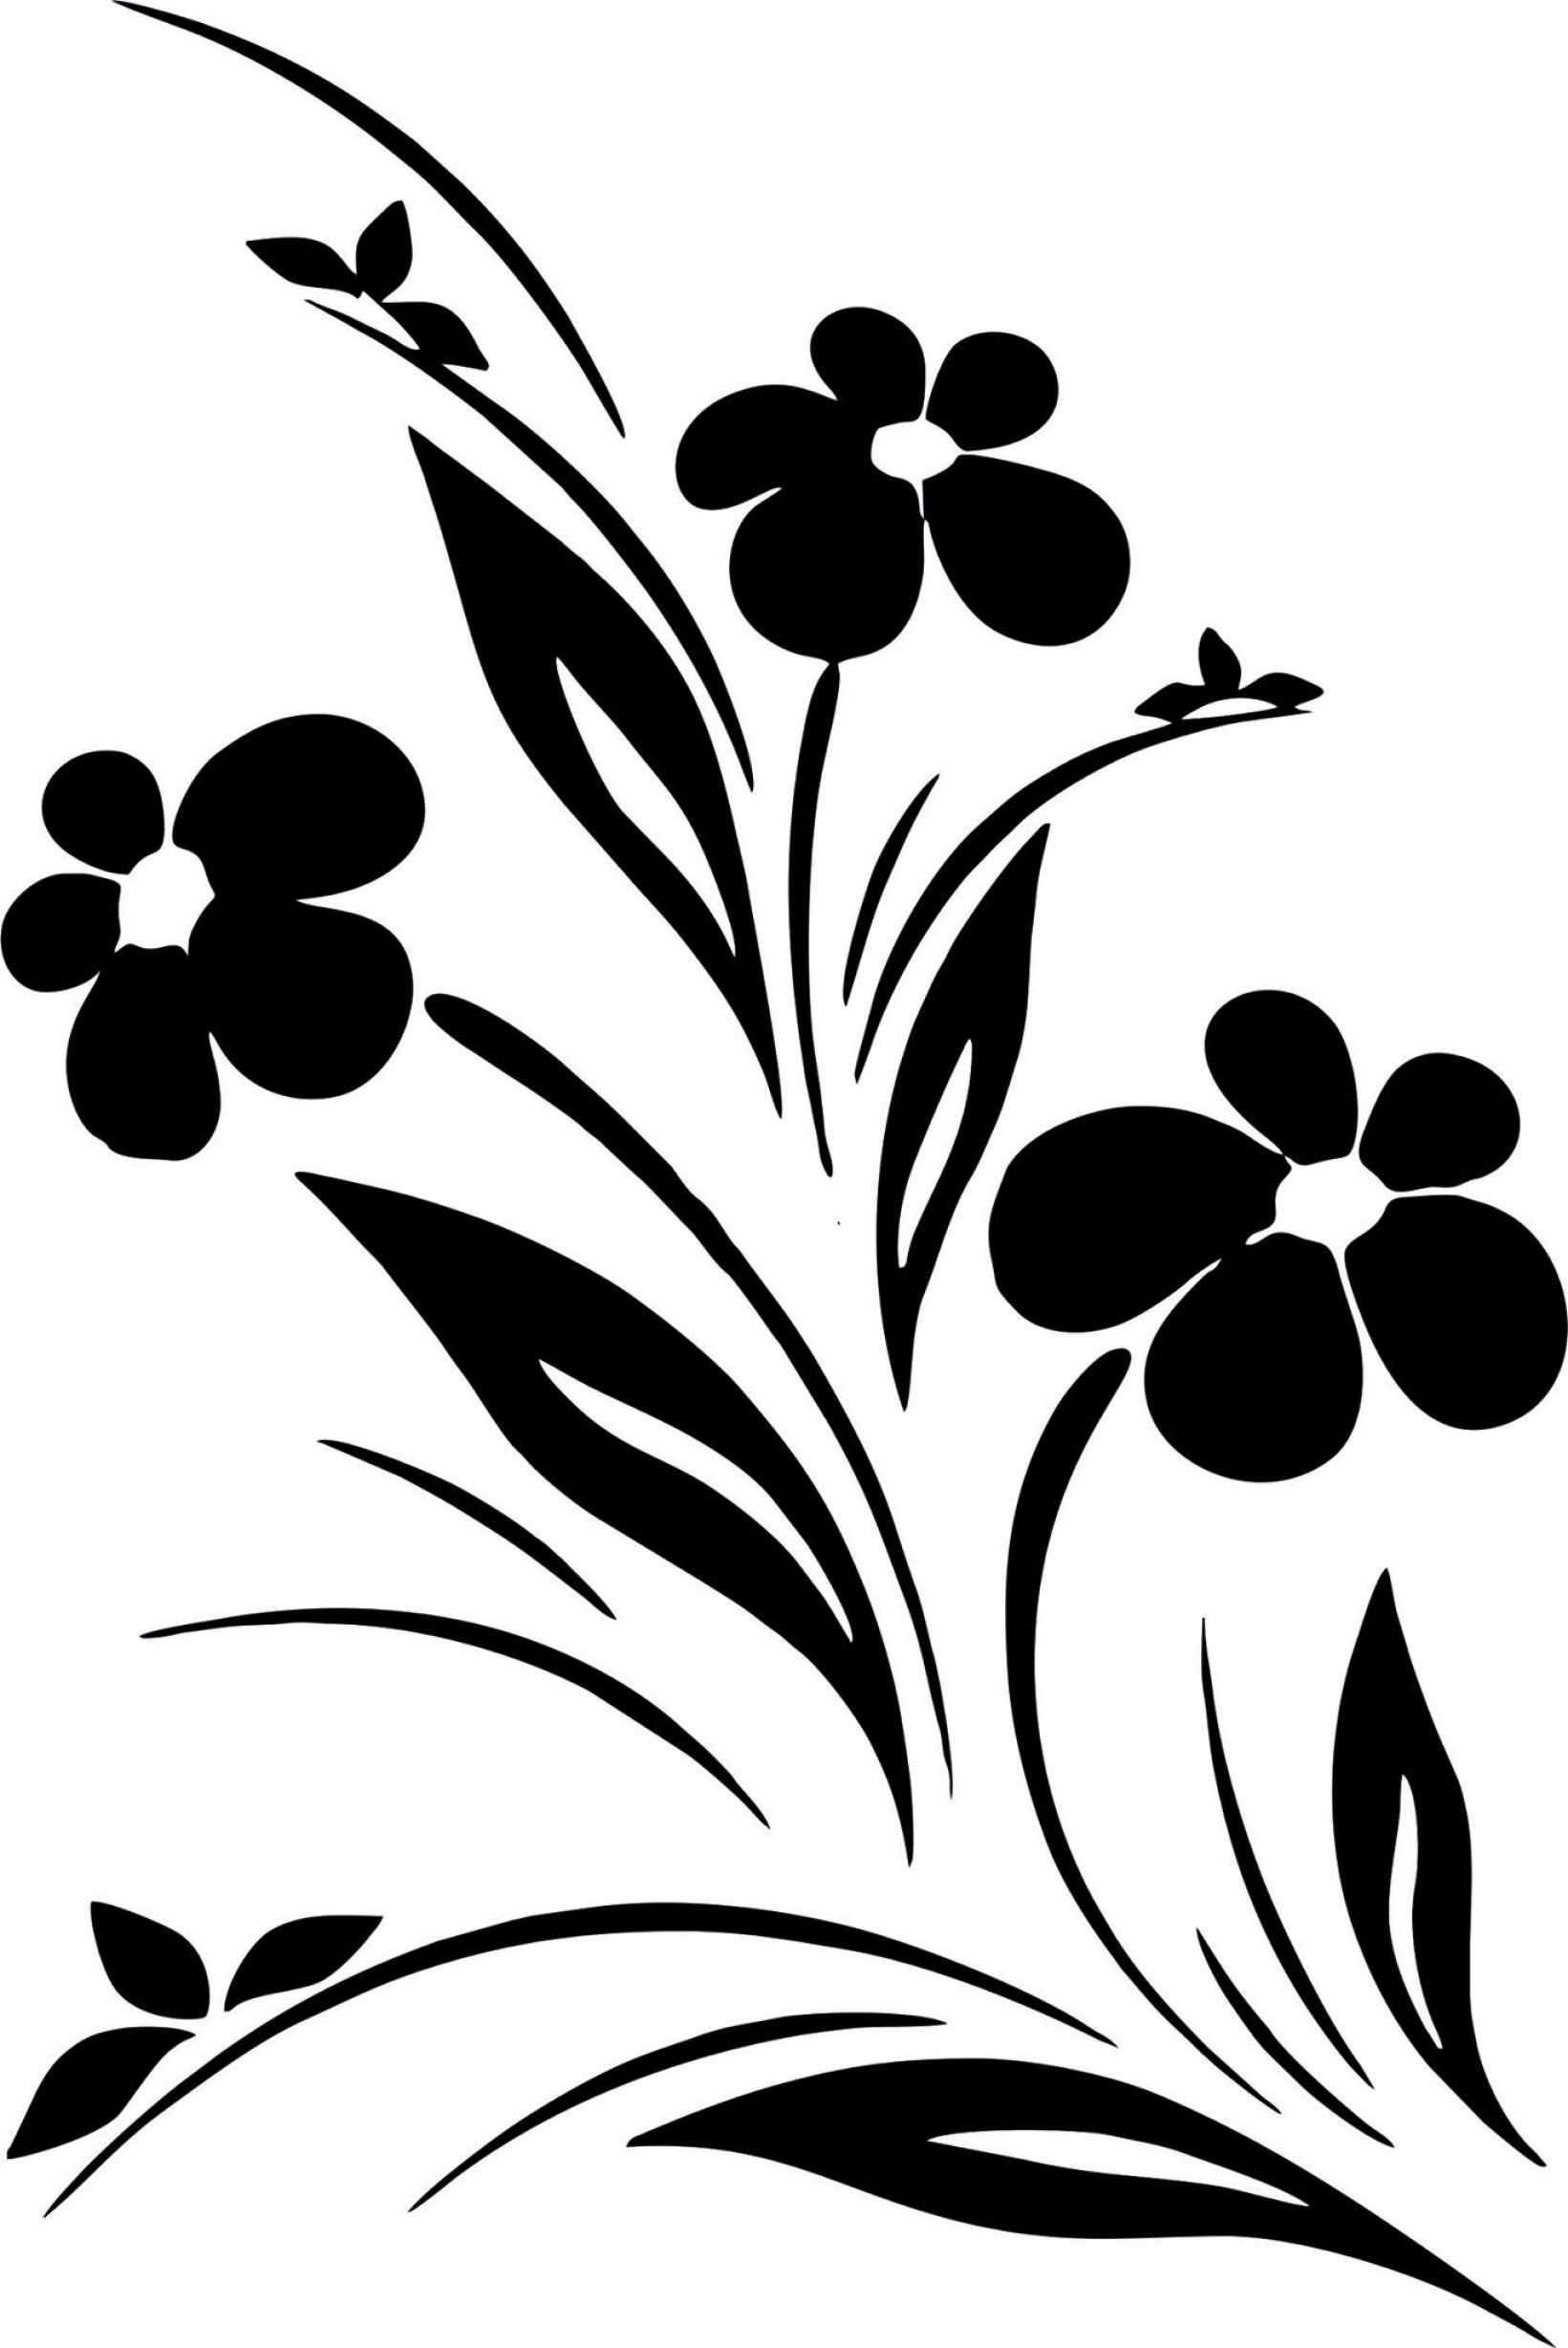 Download Black Flower Vector at Vectorified.com | Collection of ...